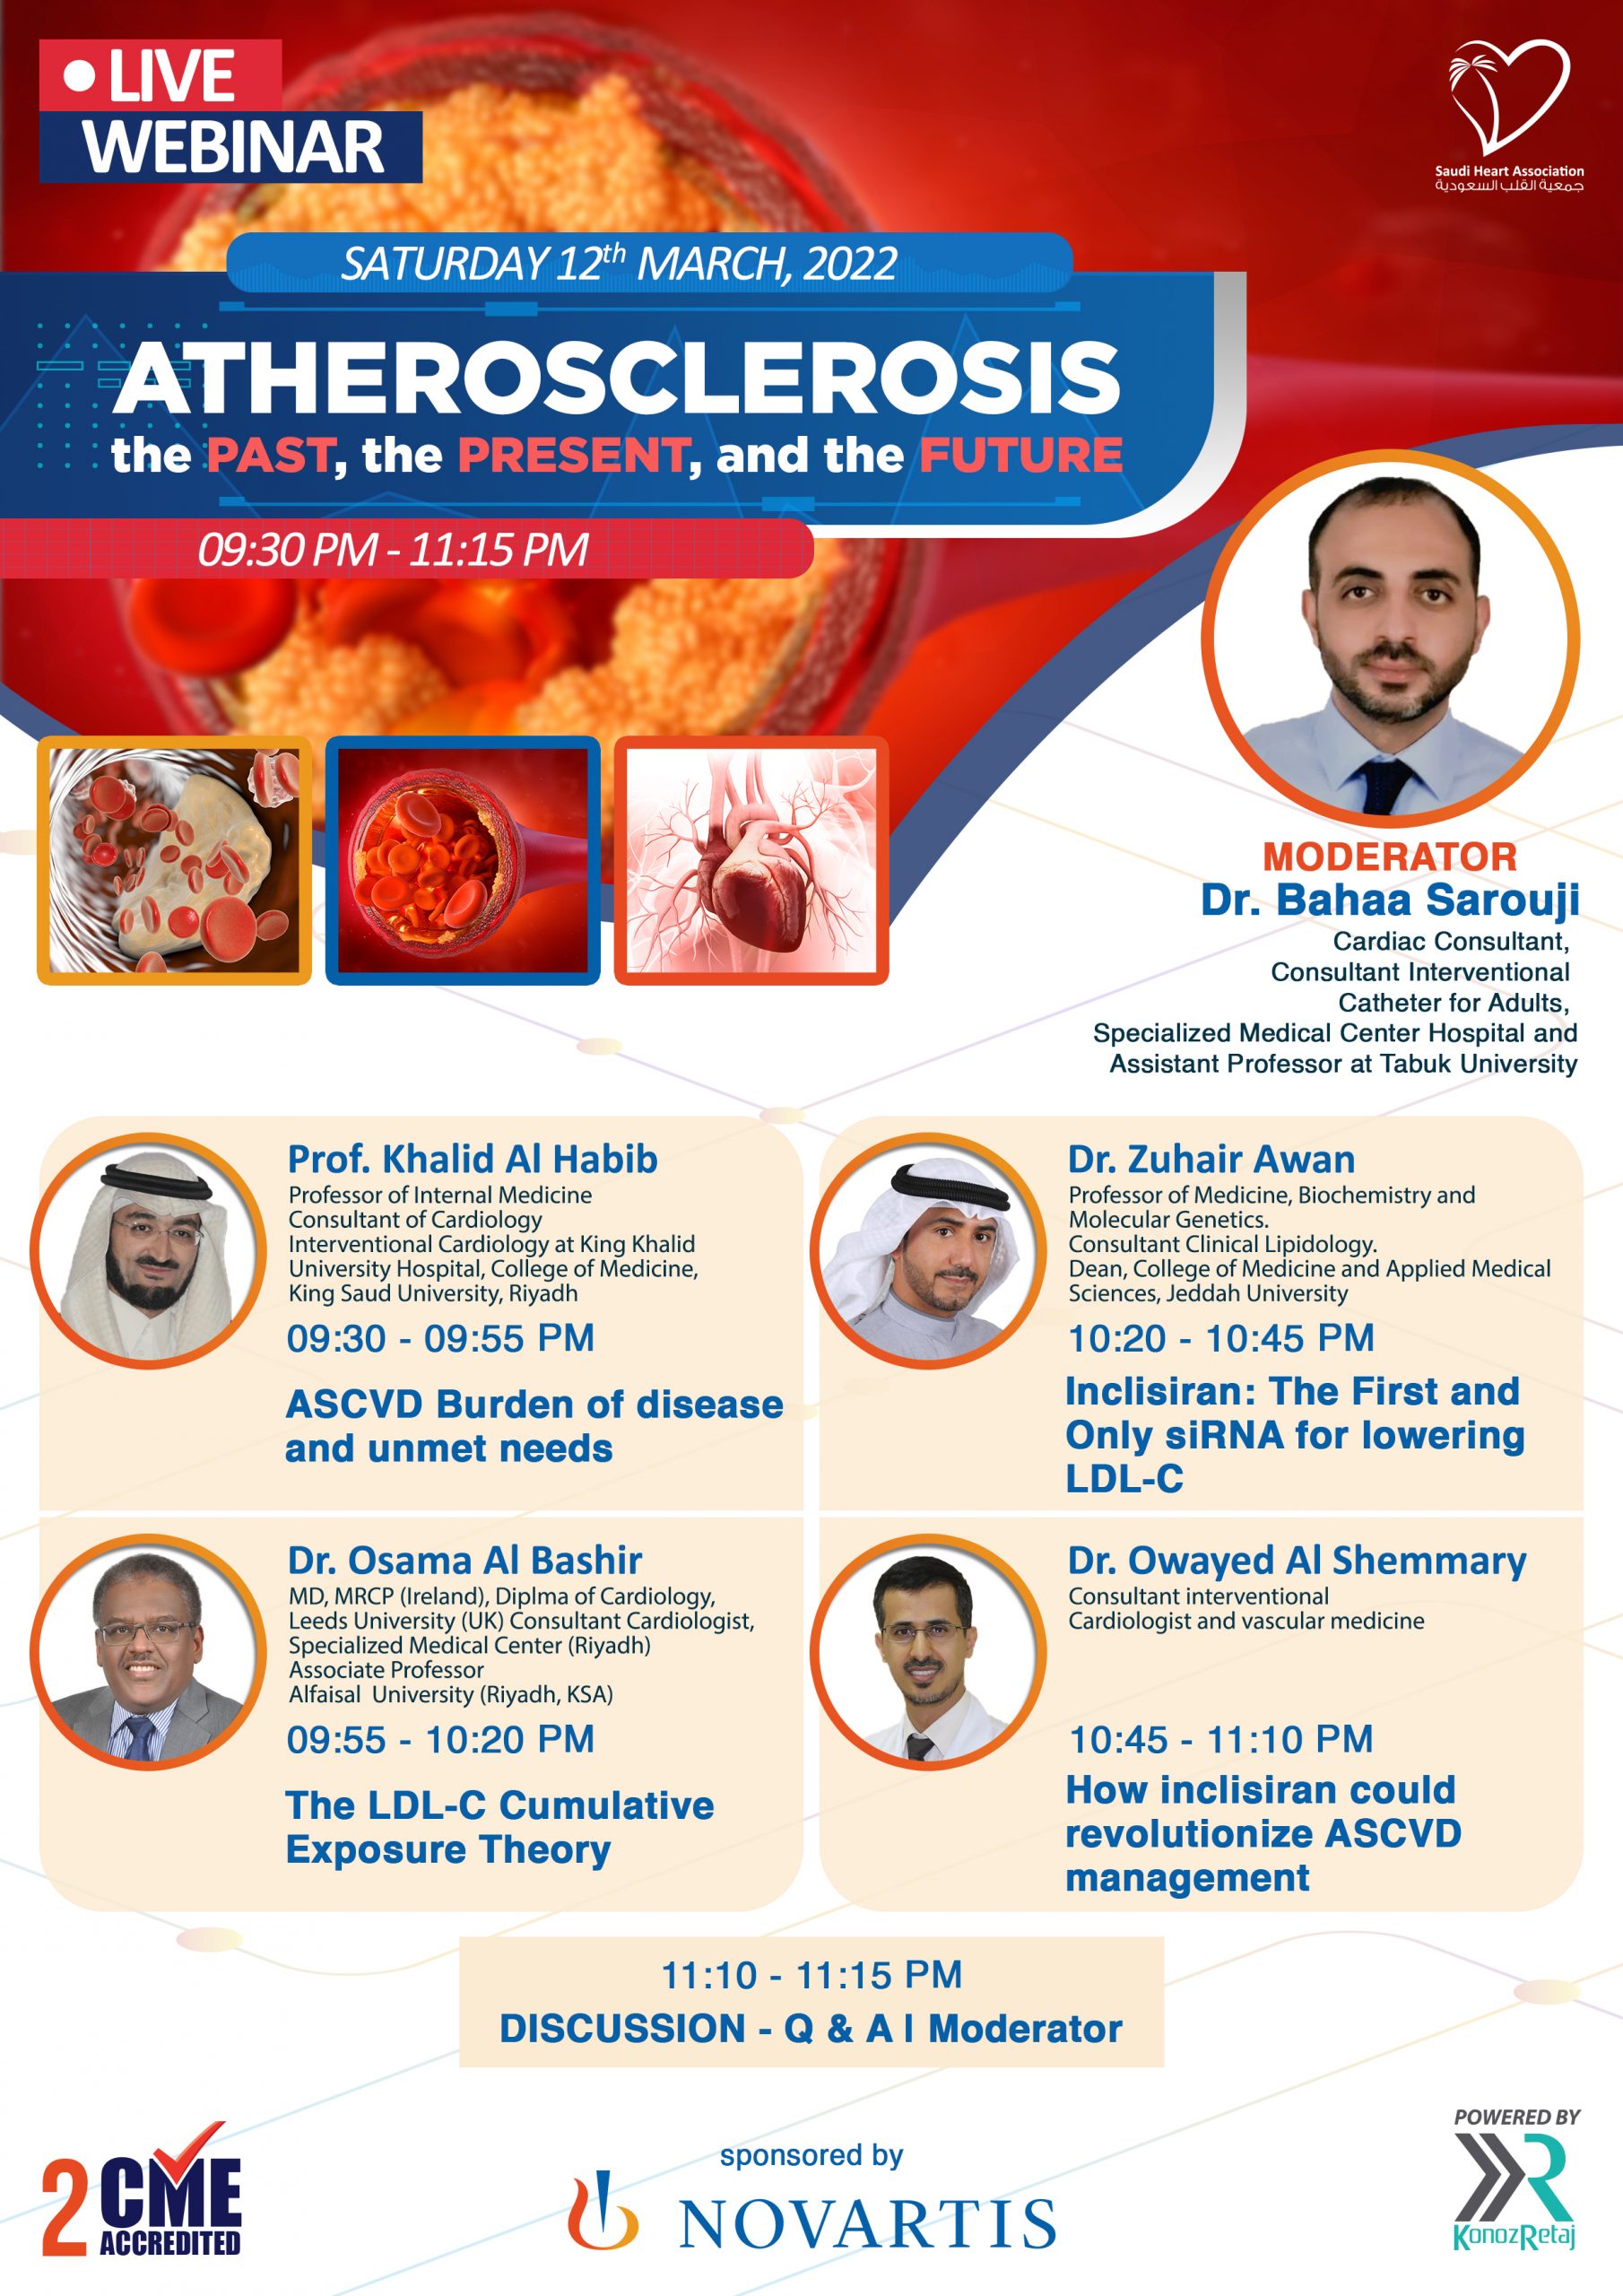 ATHEROSCLEROSIS The PAST, The PRESENT, and The FUTURE – March 12, 2022